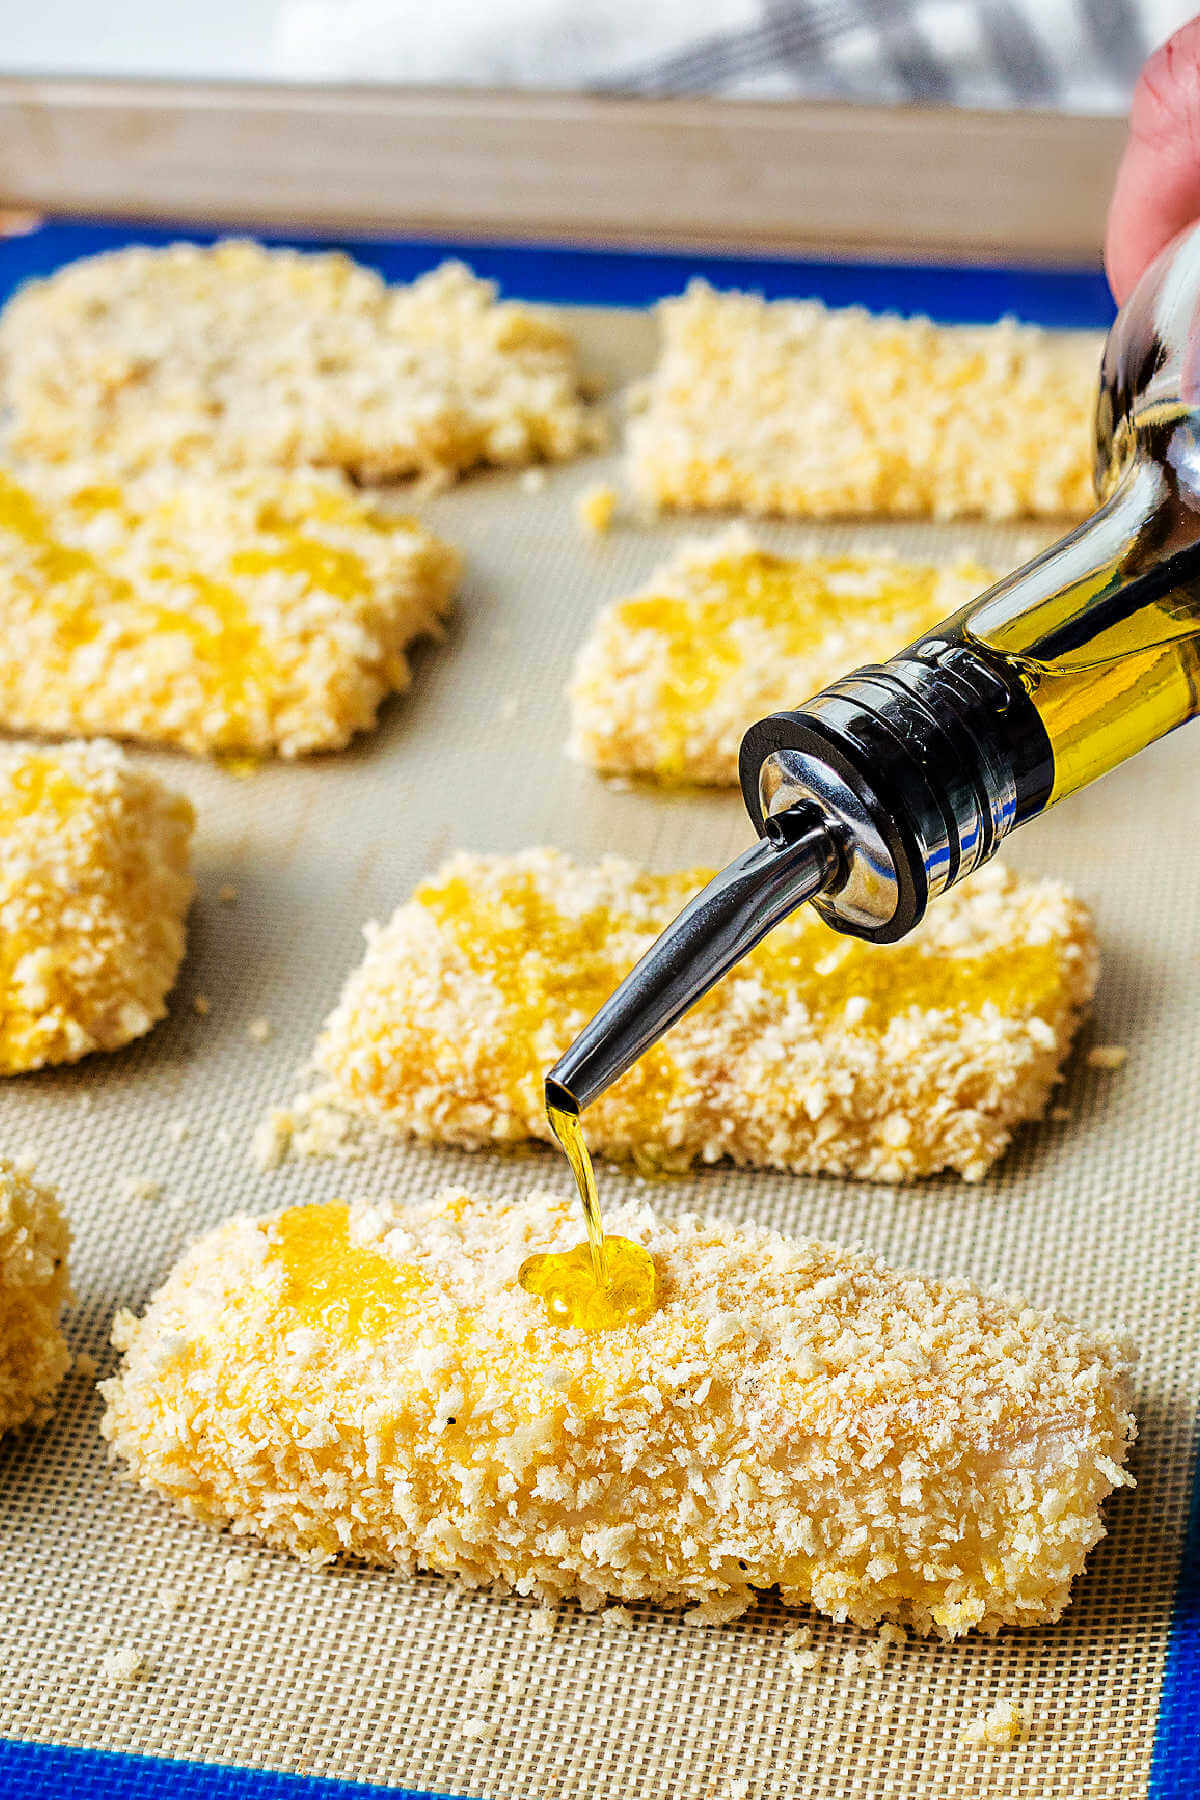 drizzling olive oil on breaded fish filets prior to baking.